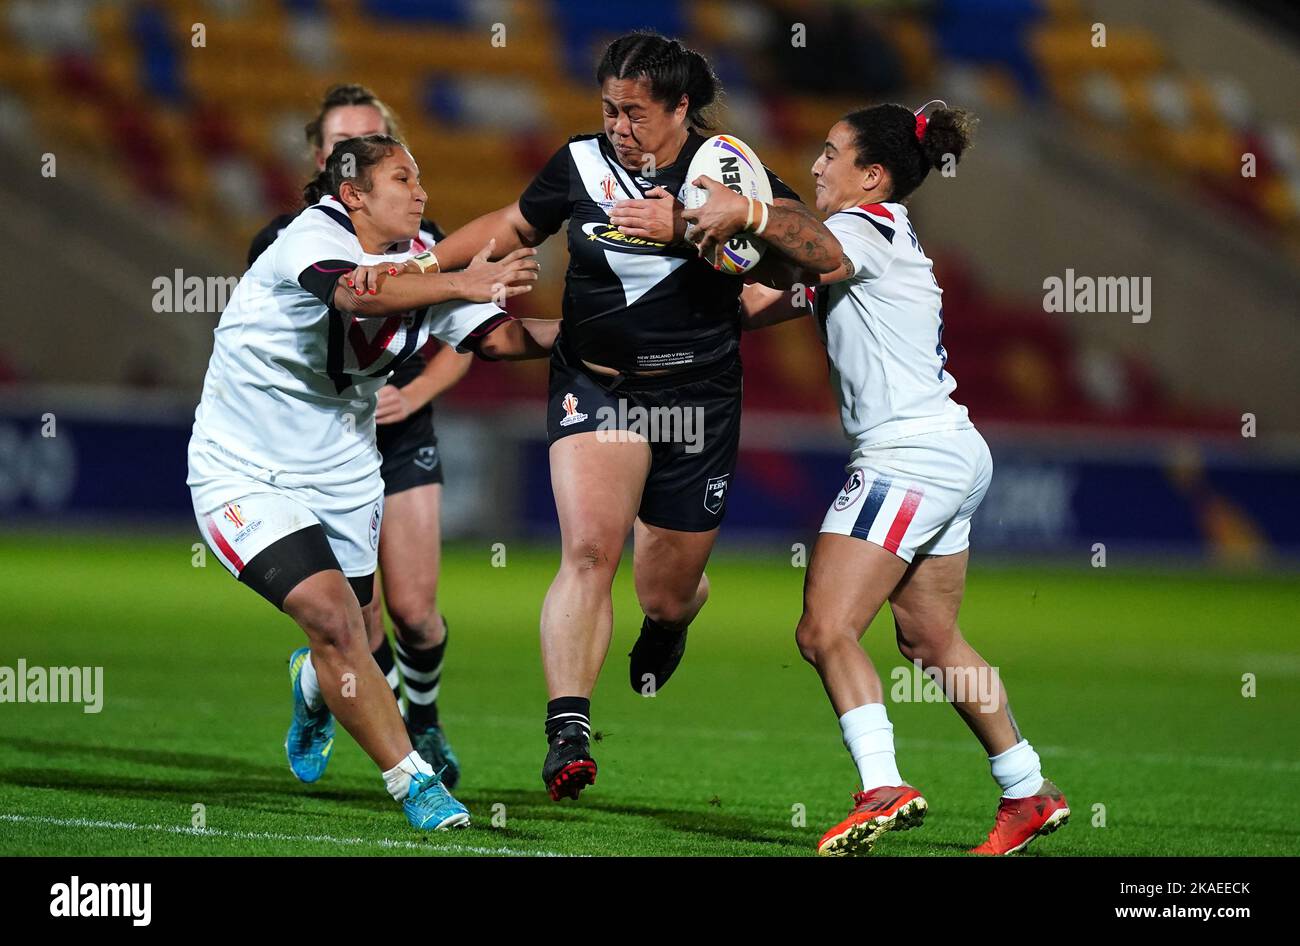 New Zealand's Annetta Nu'Uausala is tackled by France's Elisa Ciria and Leila Bessahli during the Women's Rugby League World Cup group B match at the LNER Community Stadium, York. Picture date: Wednesday November 2, 2022. Stock Photo